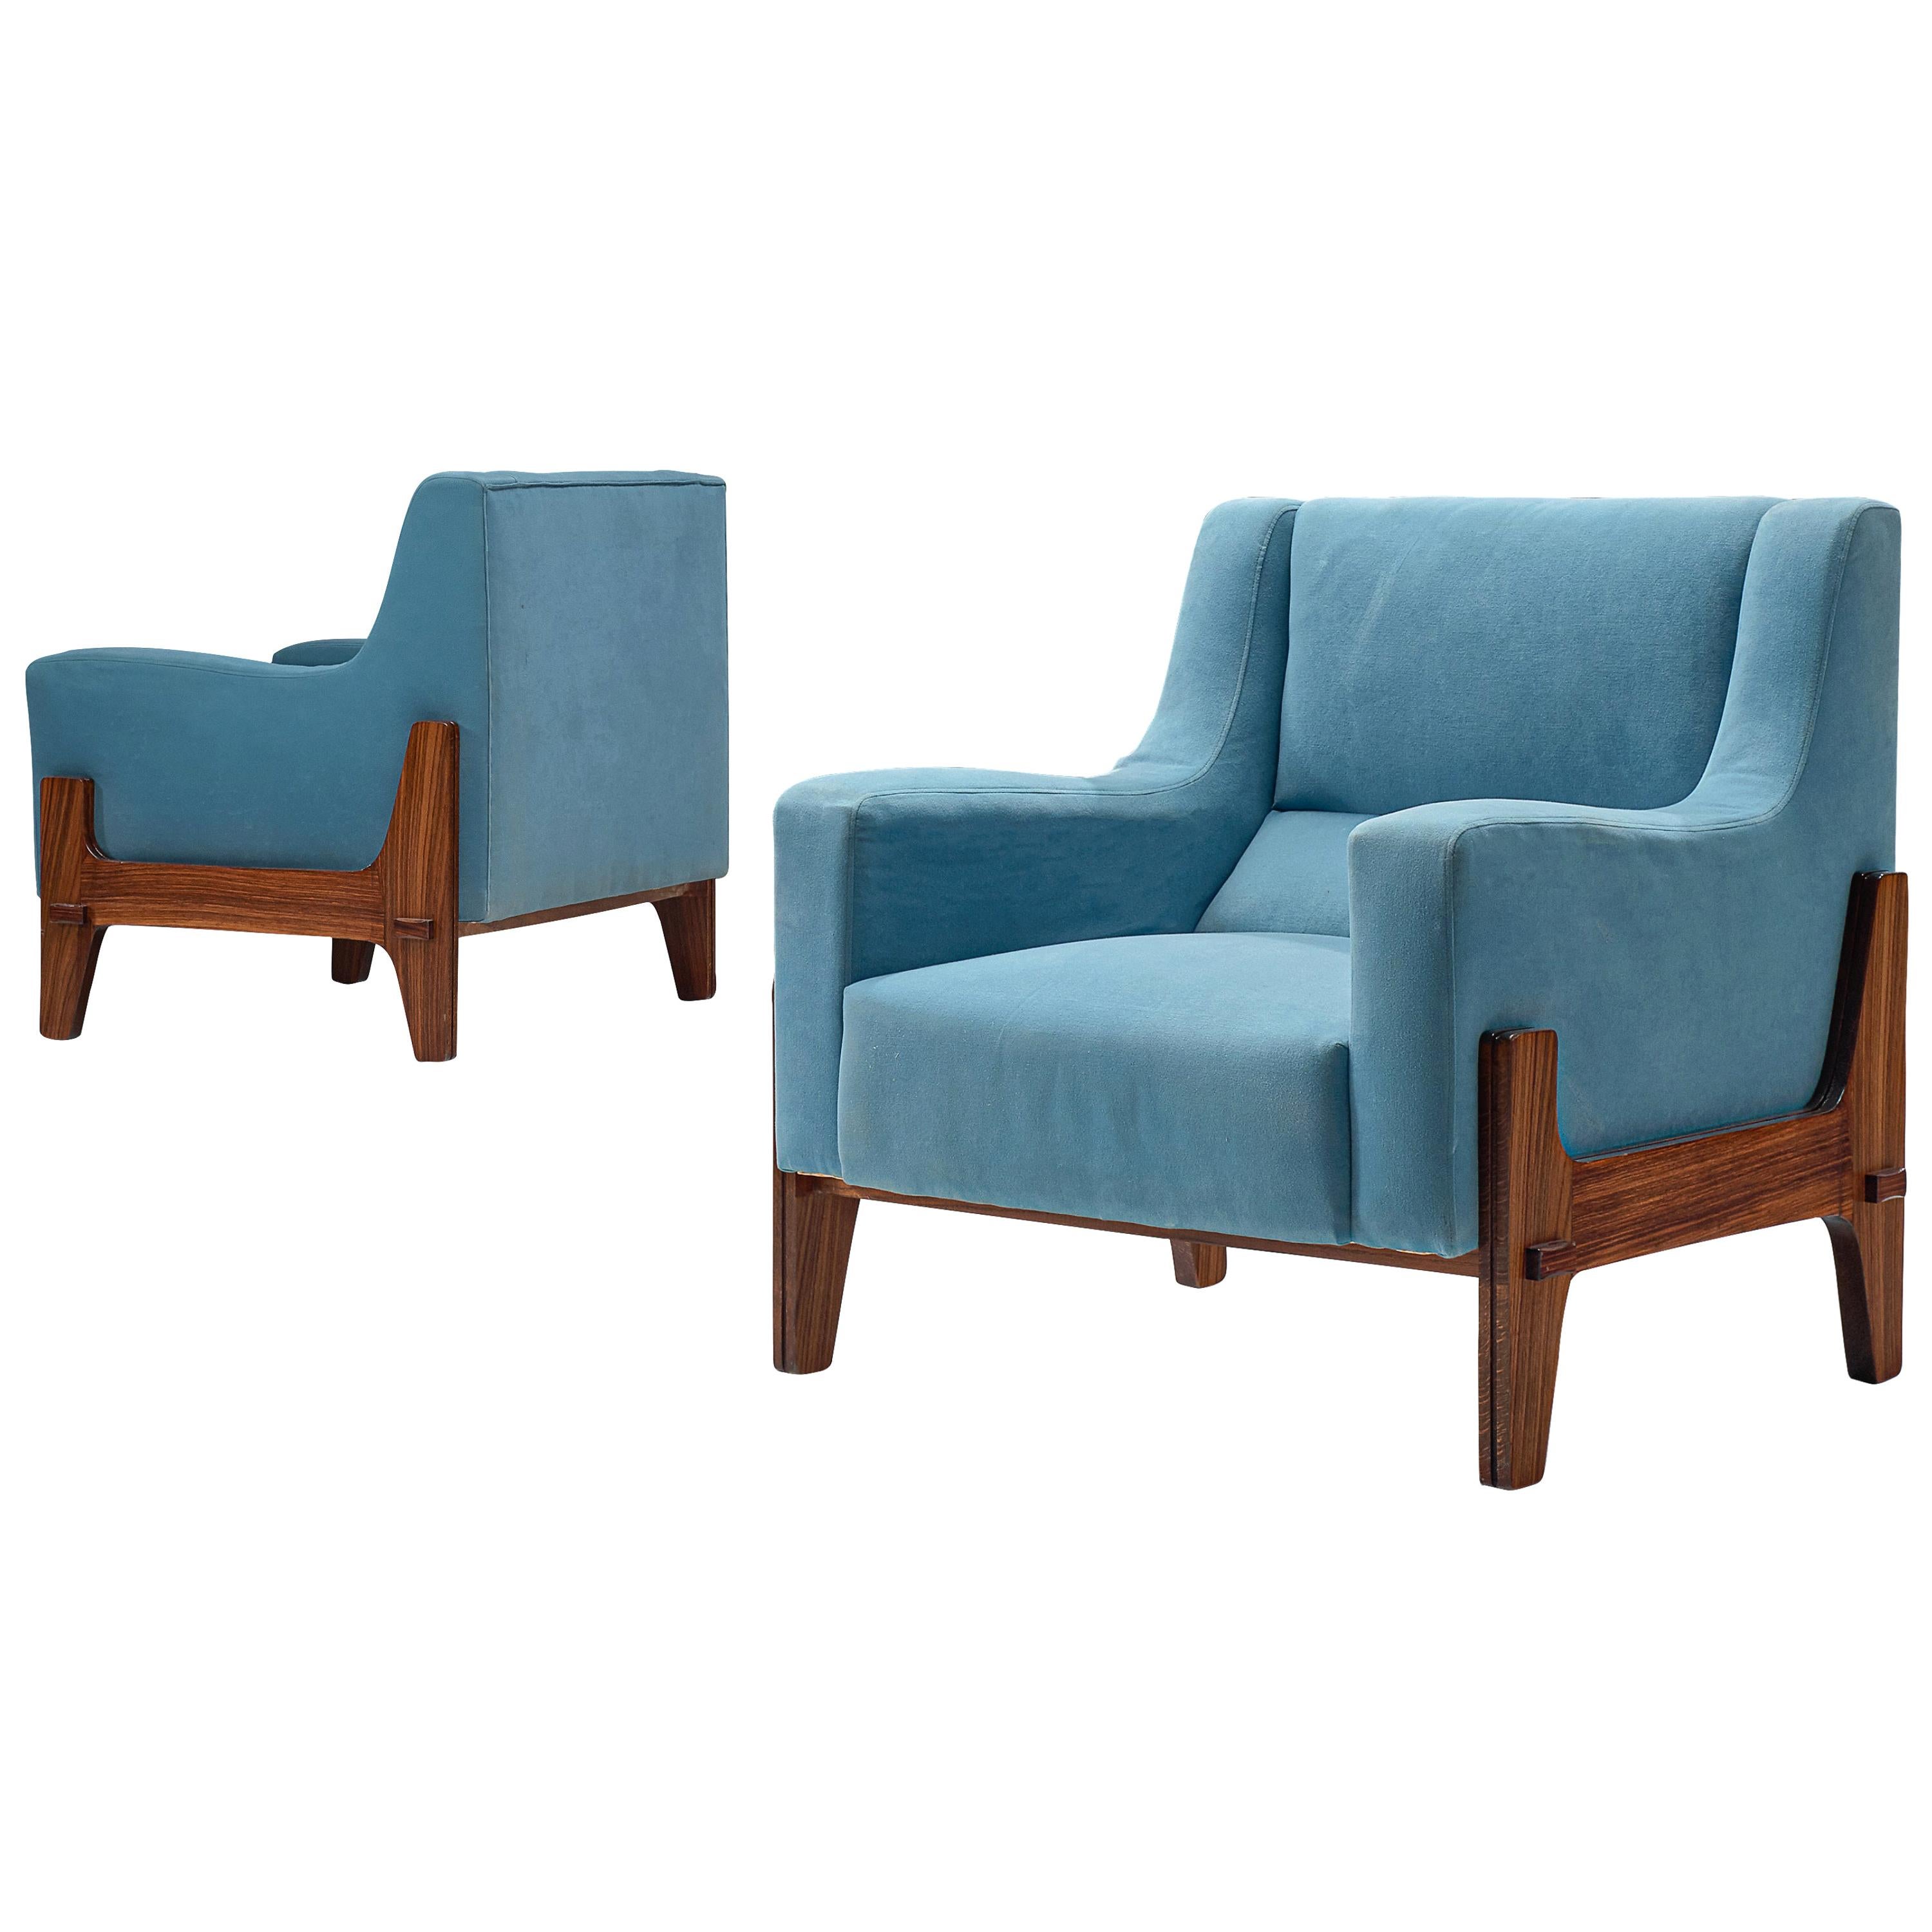 Italian Pair of Lounge Chairs in Bright Blue Upholstery